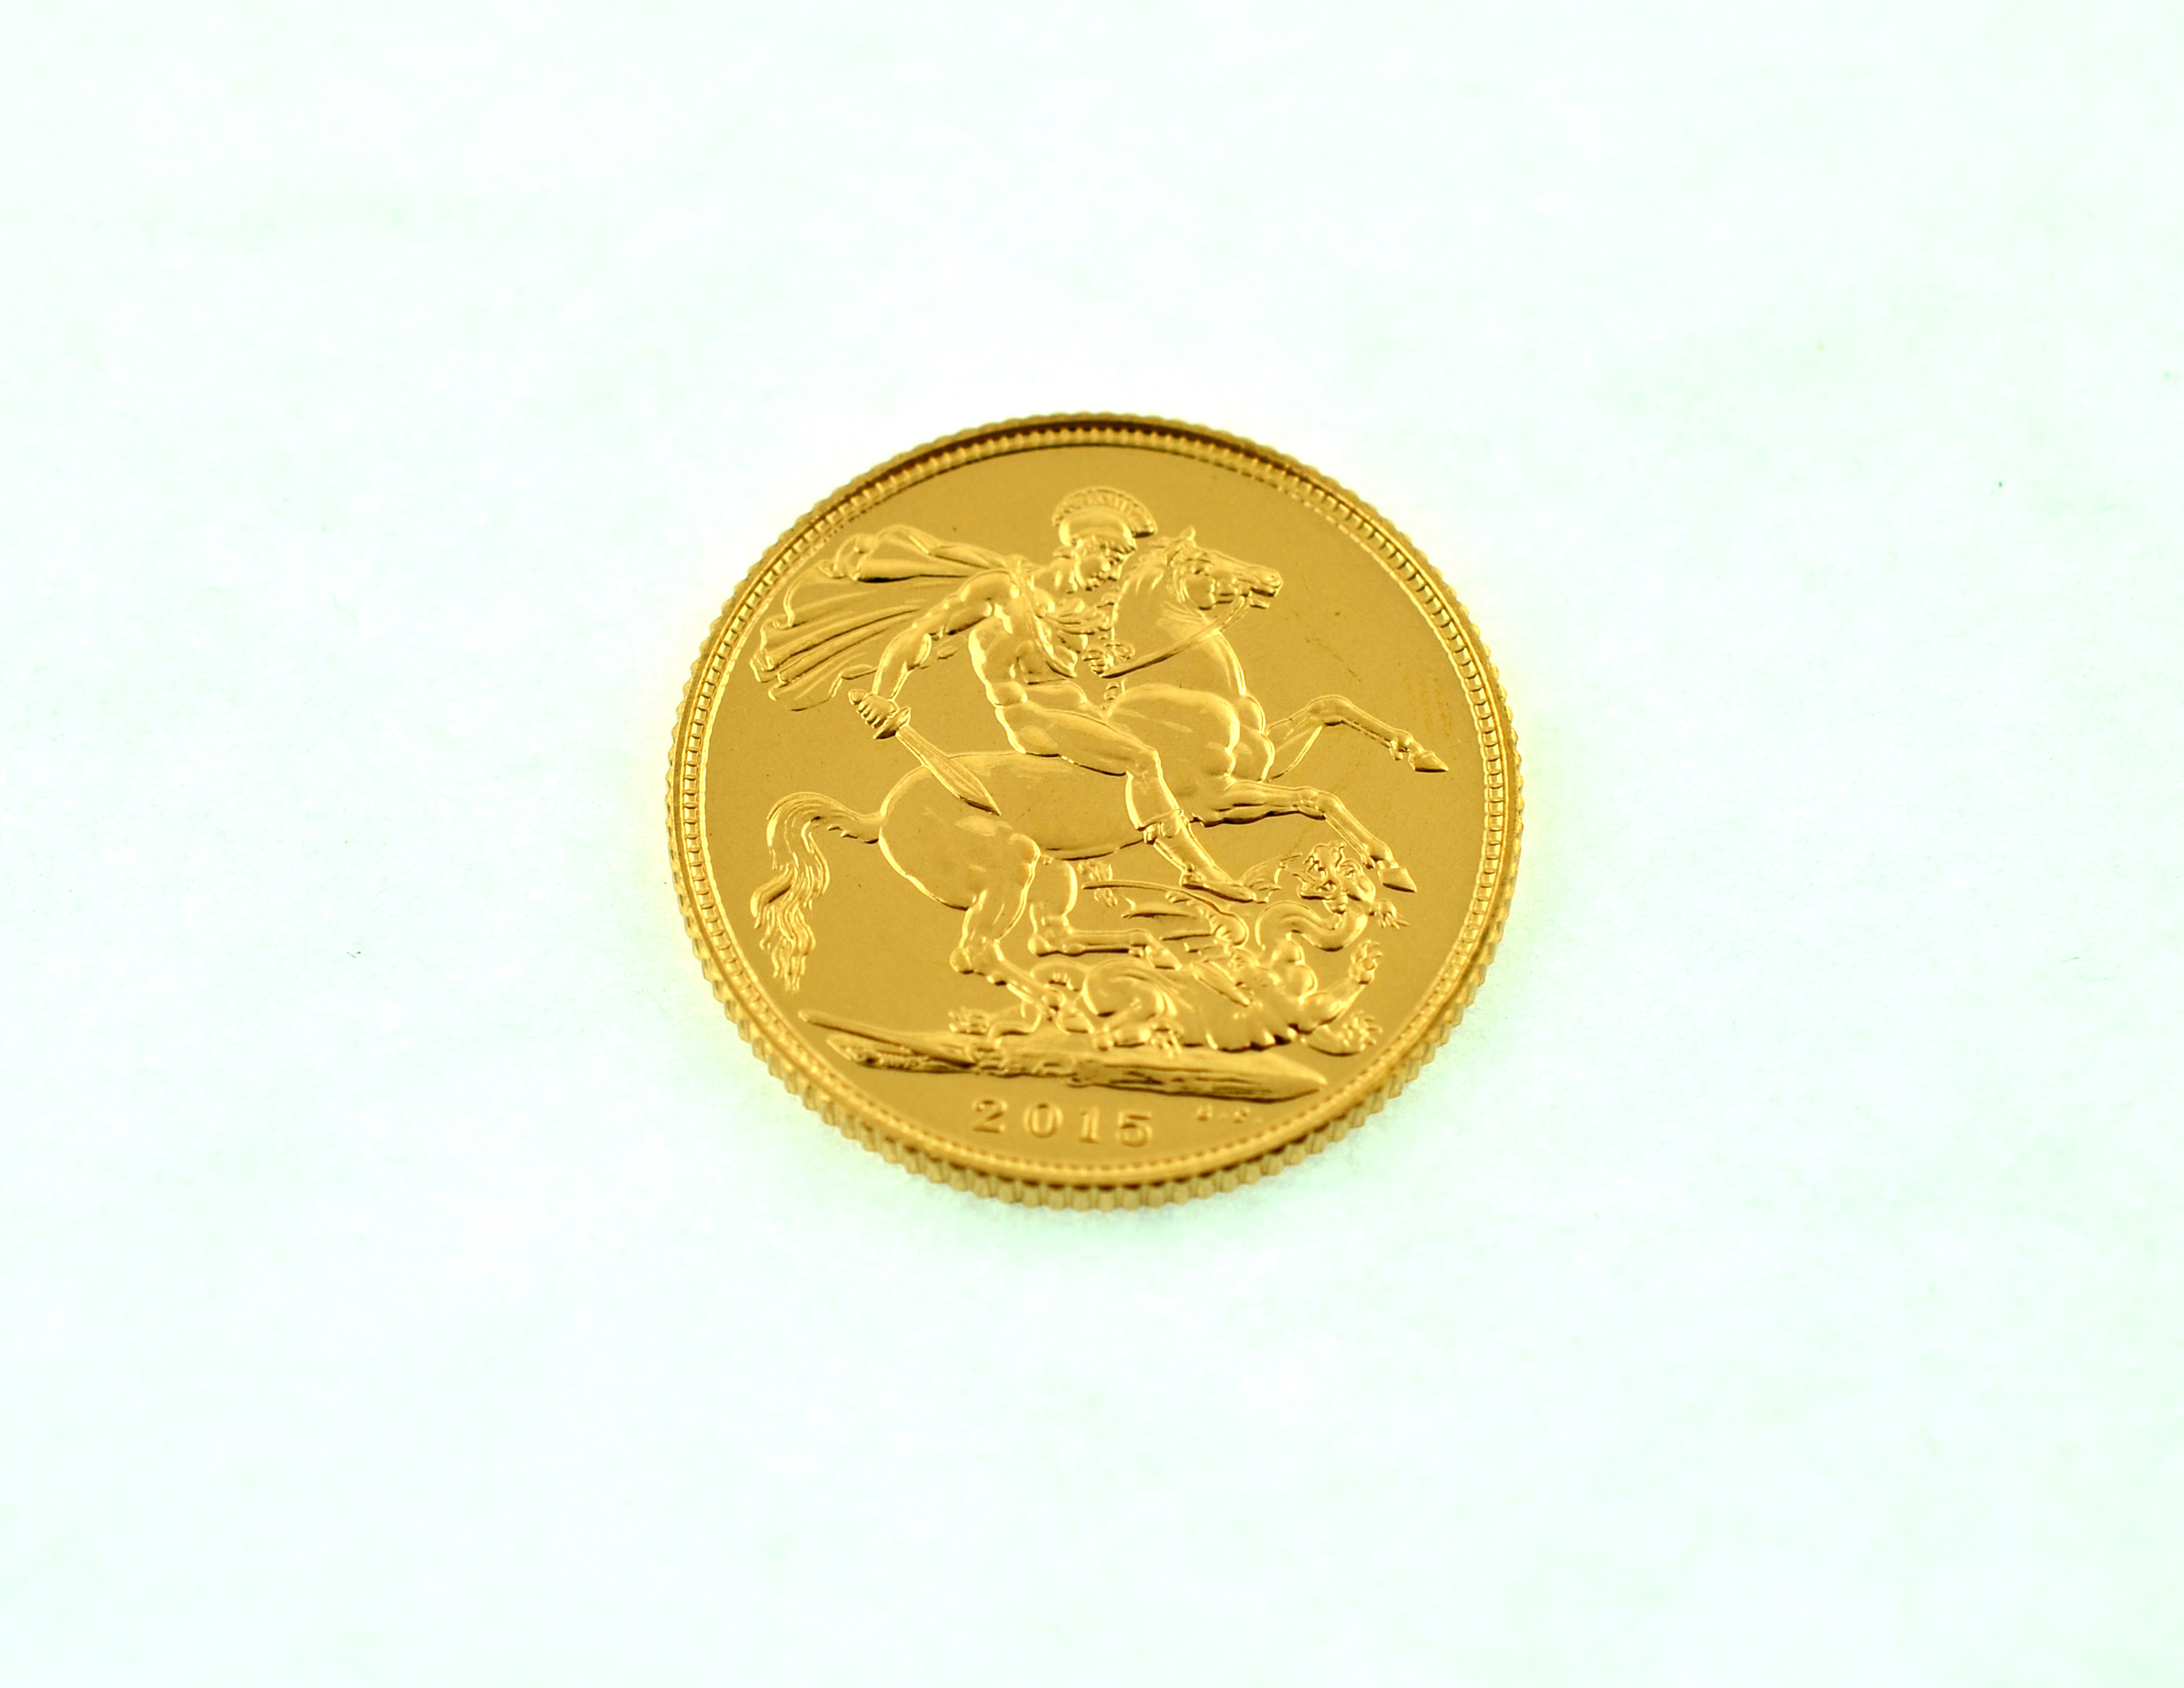 A 2015 full gold sovereign.